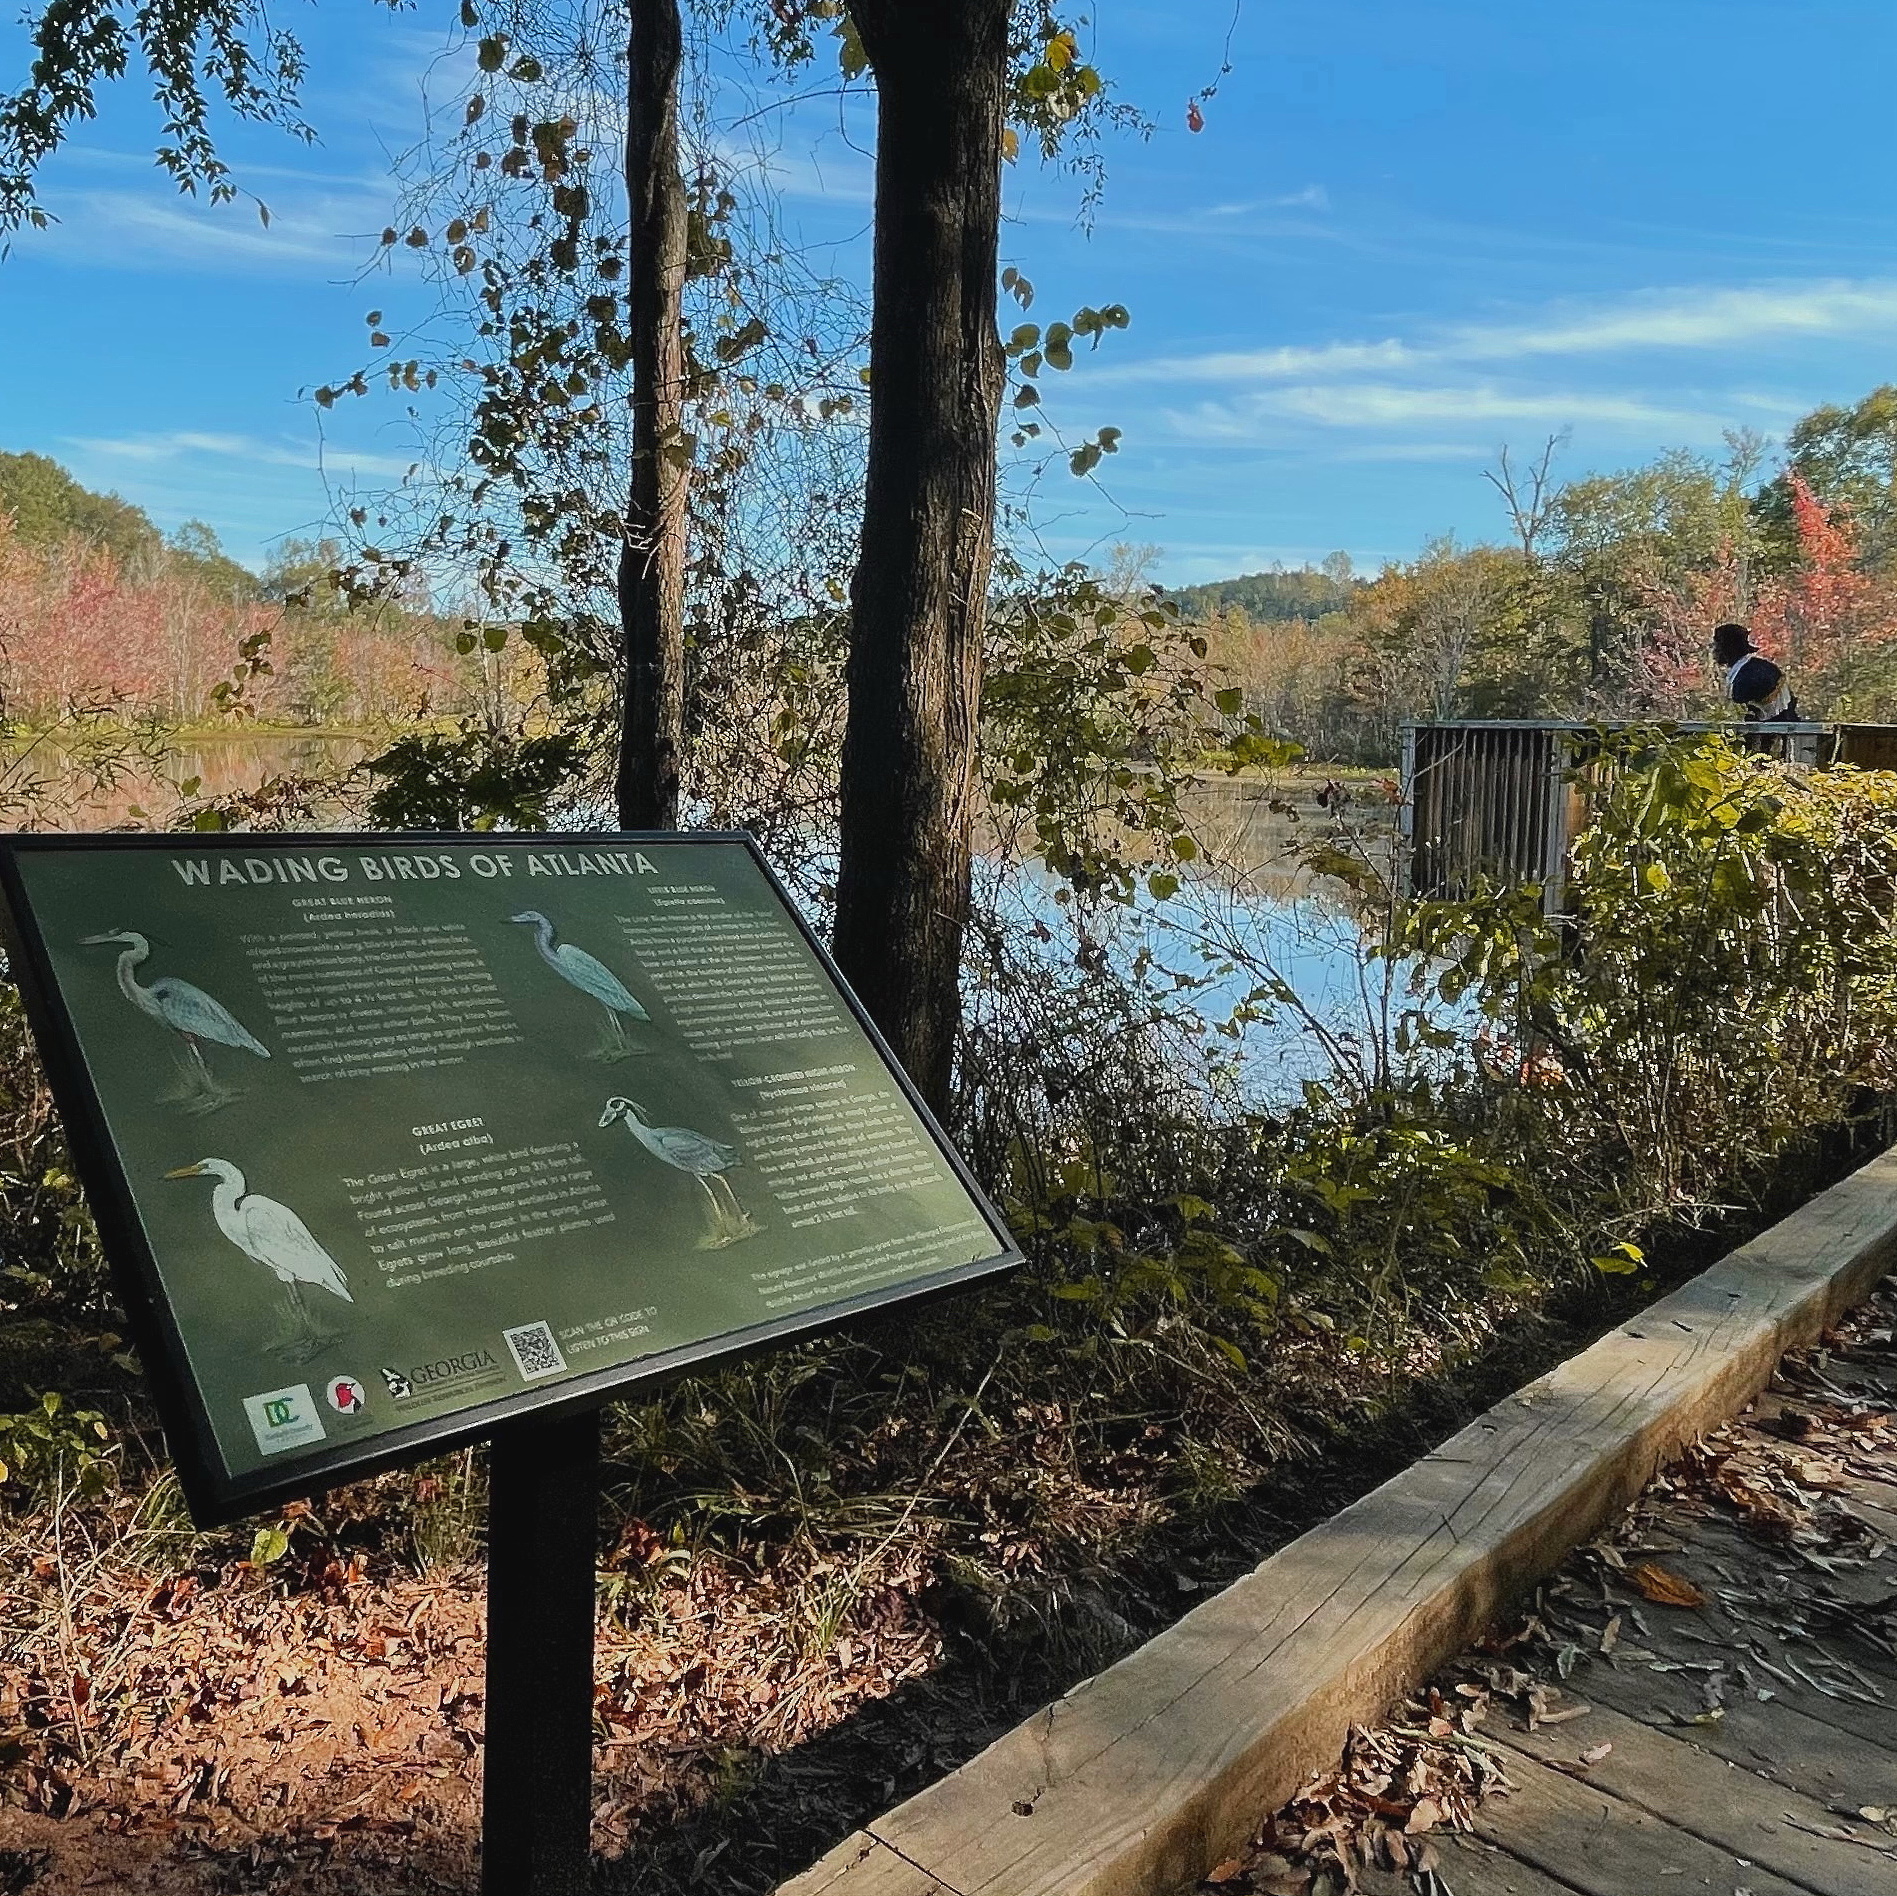 A informational sign on wading birds in Atlanta.